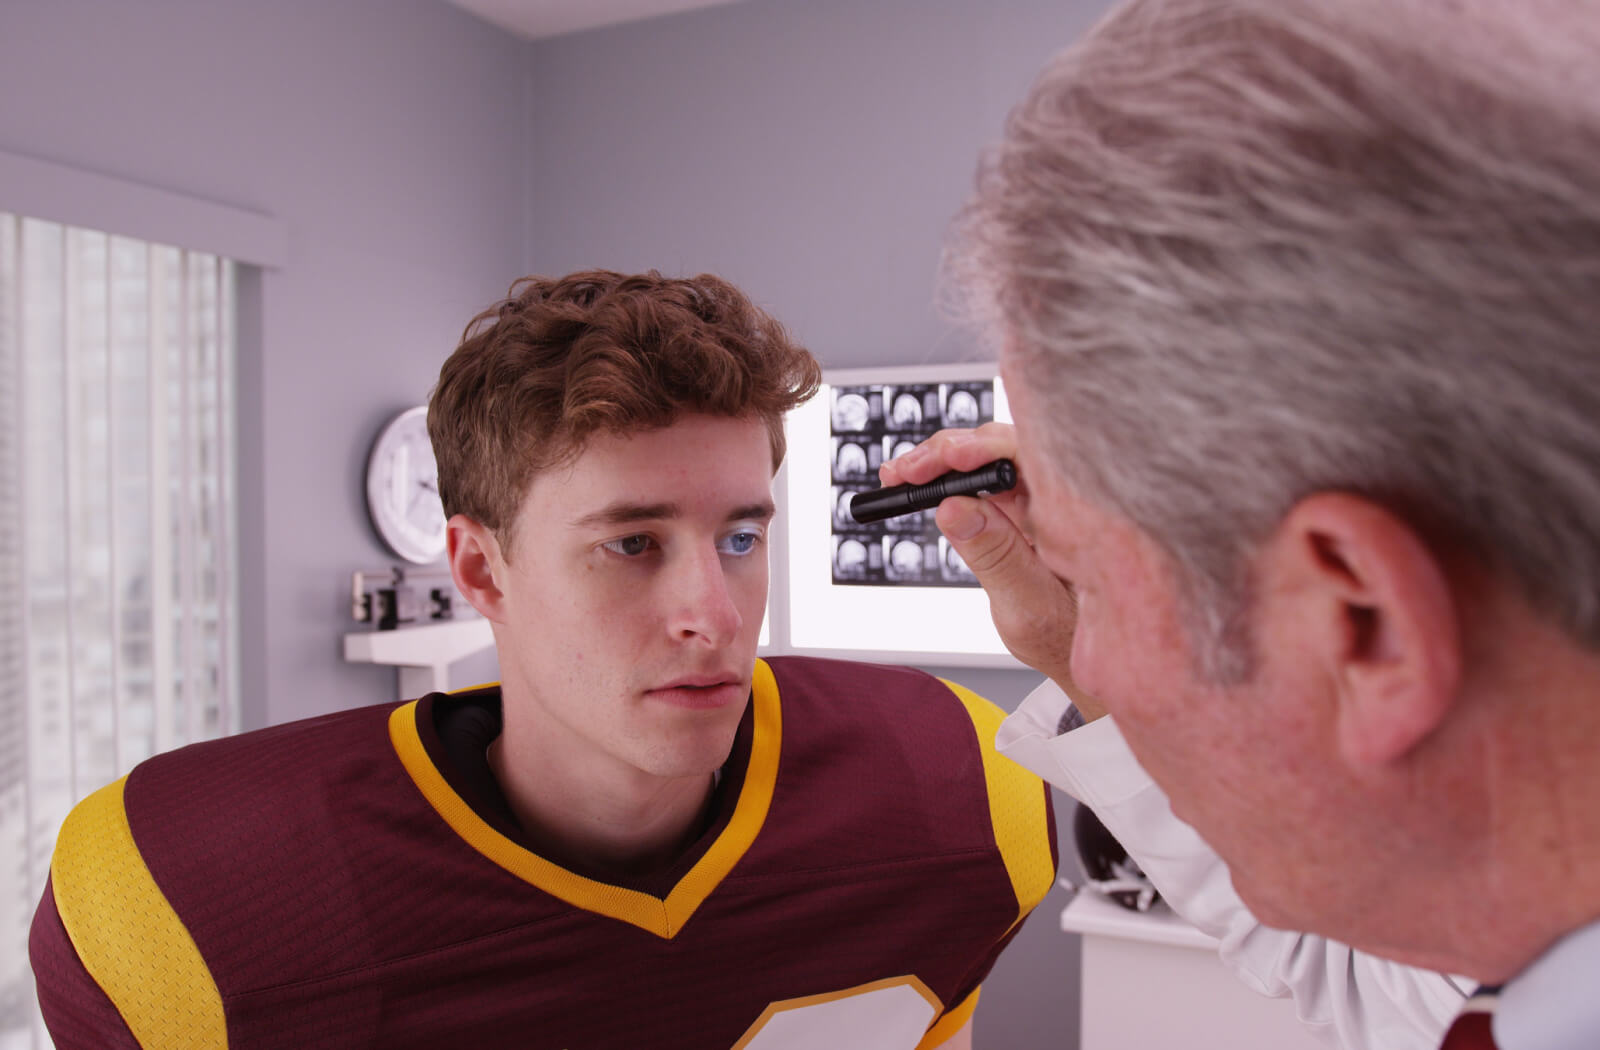 A young athlete being checked by an optometrist to see if he is concussed.